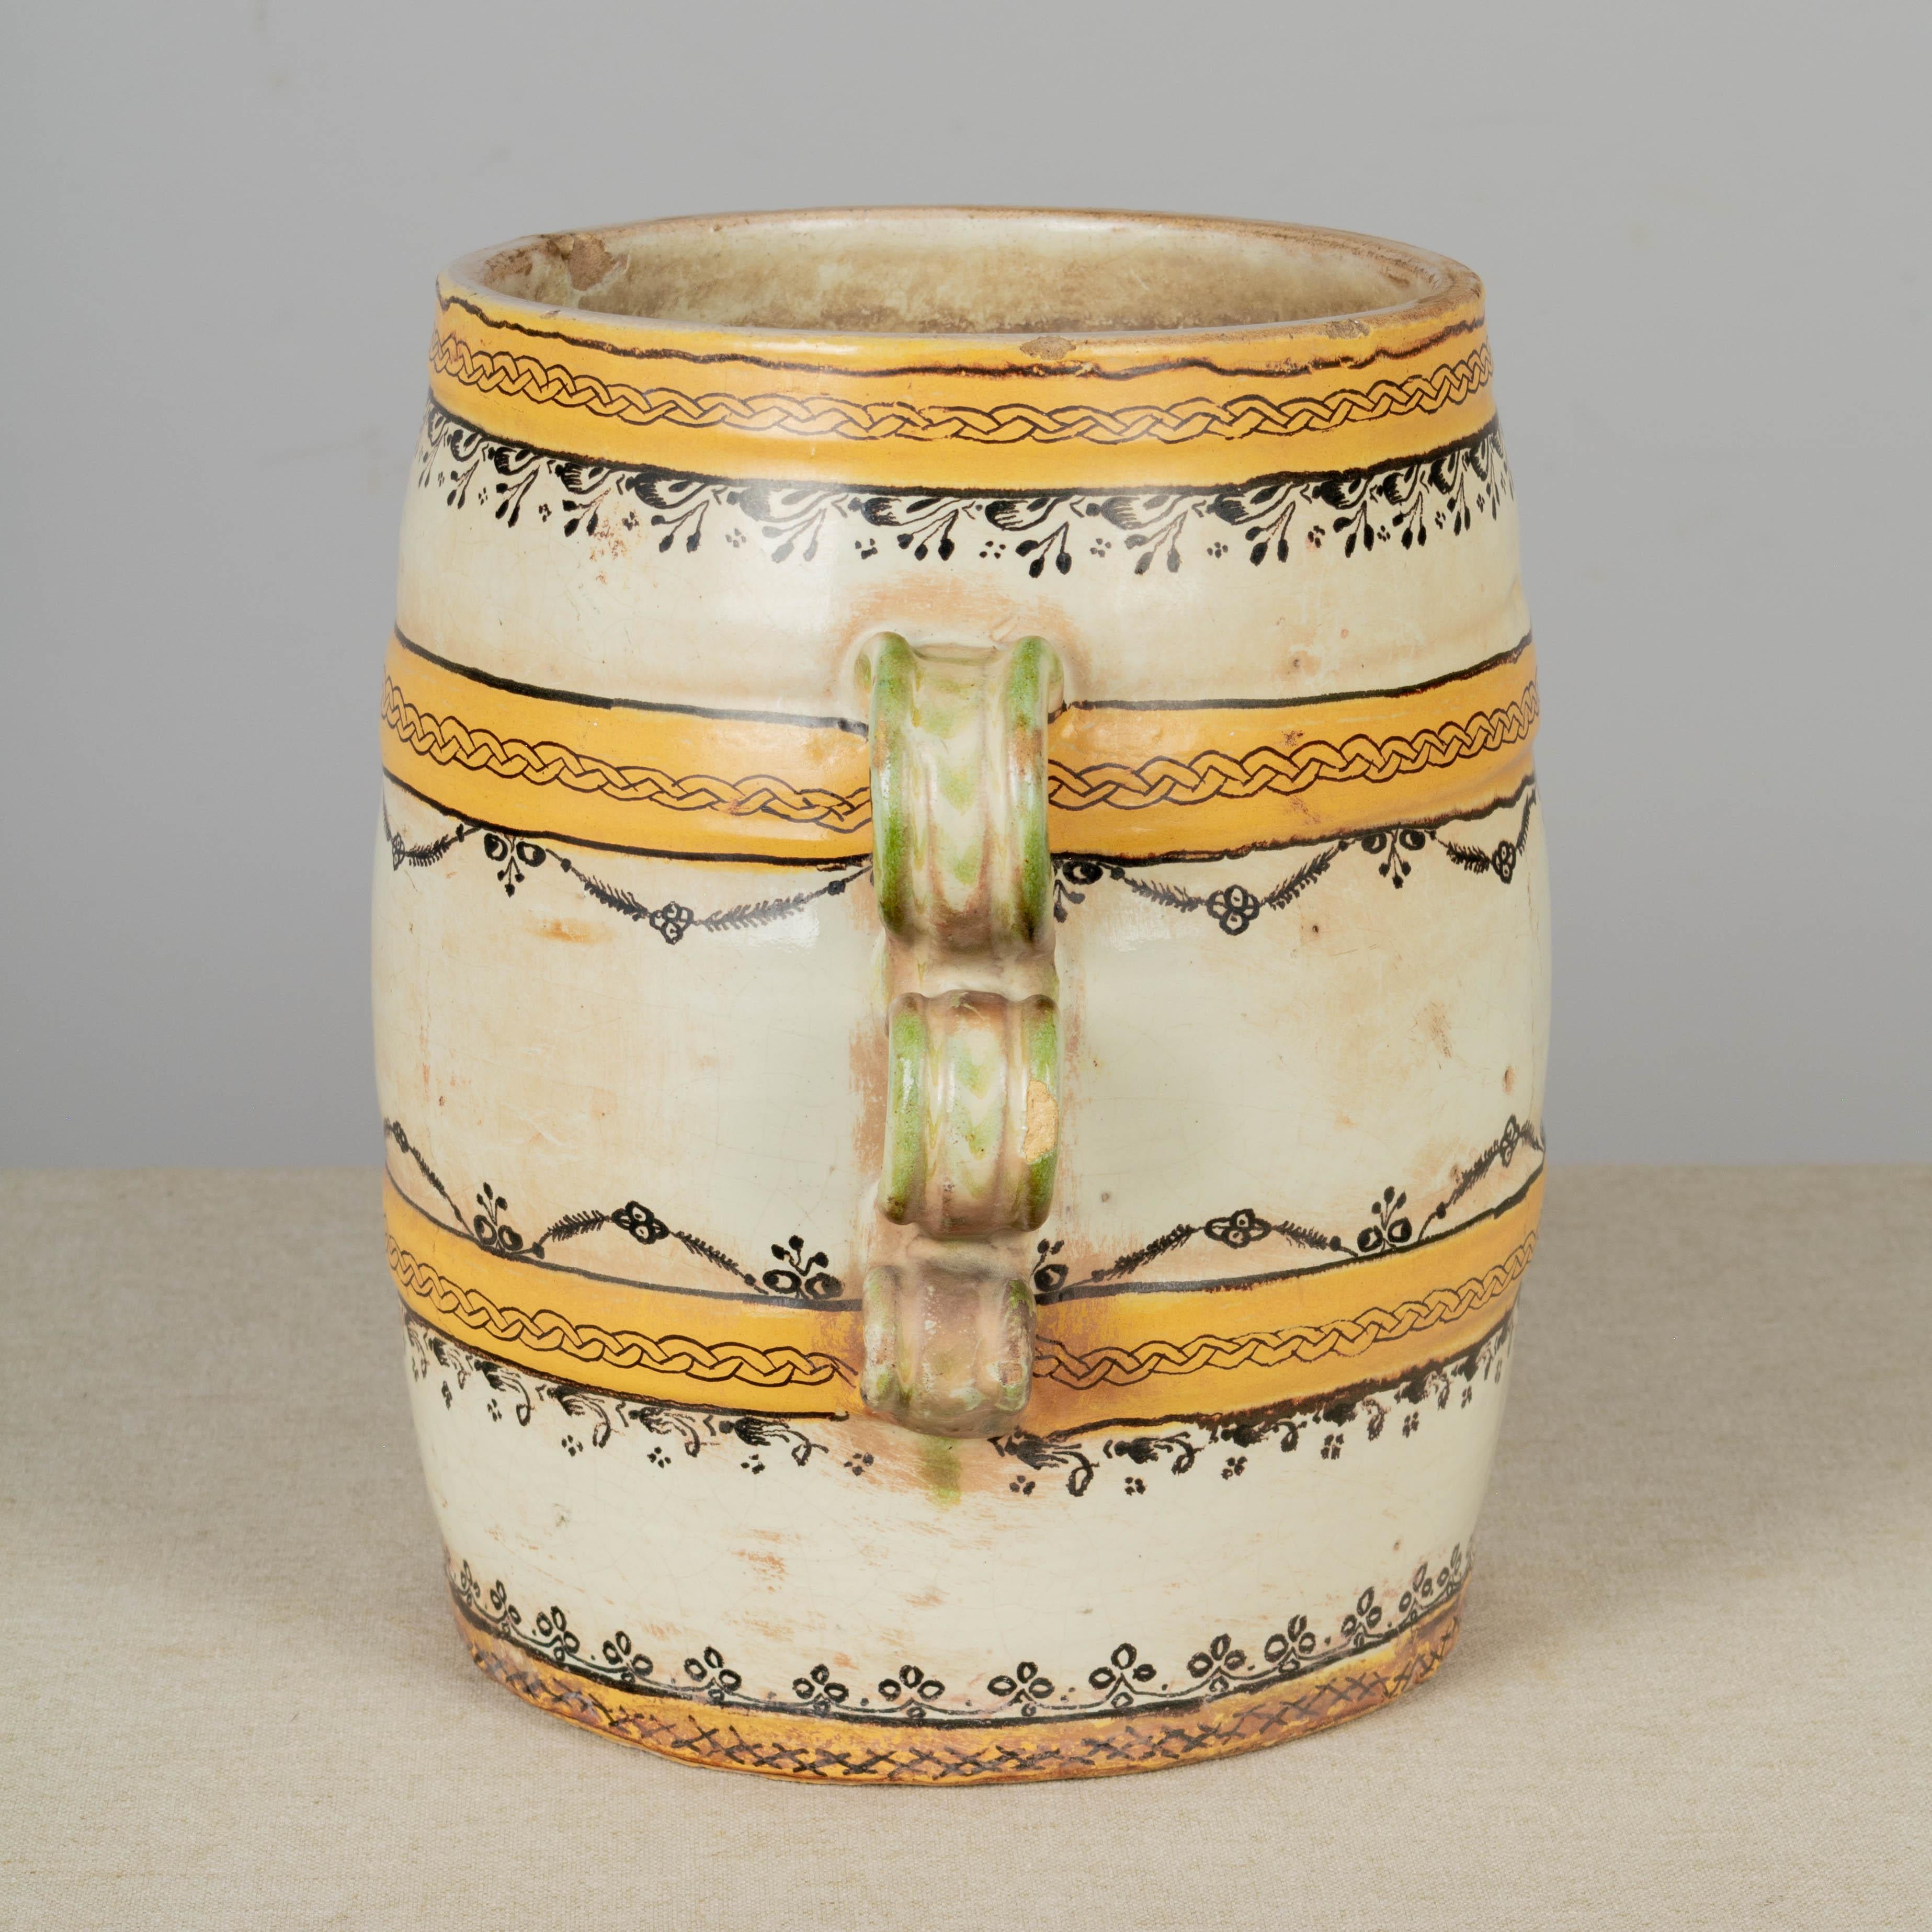 Glazed 19th Century French Pottery Jar or Cachepot